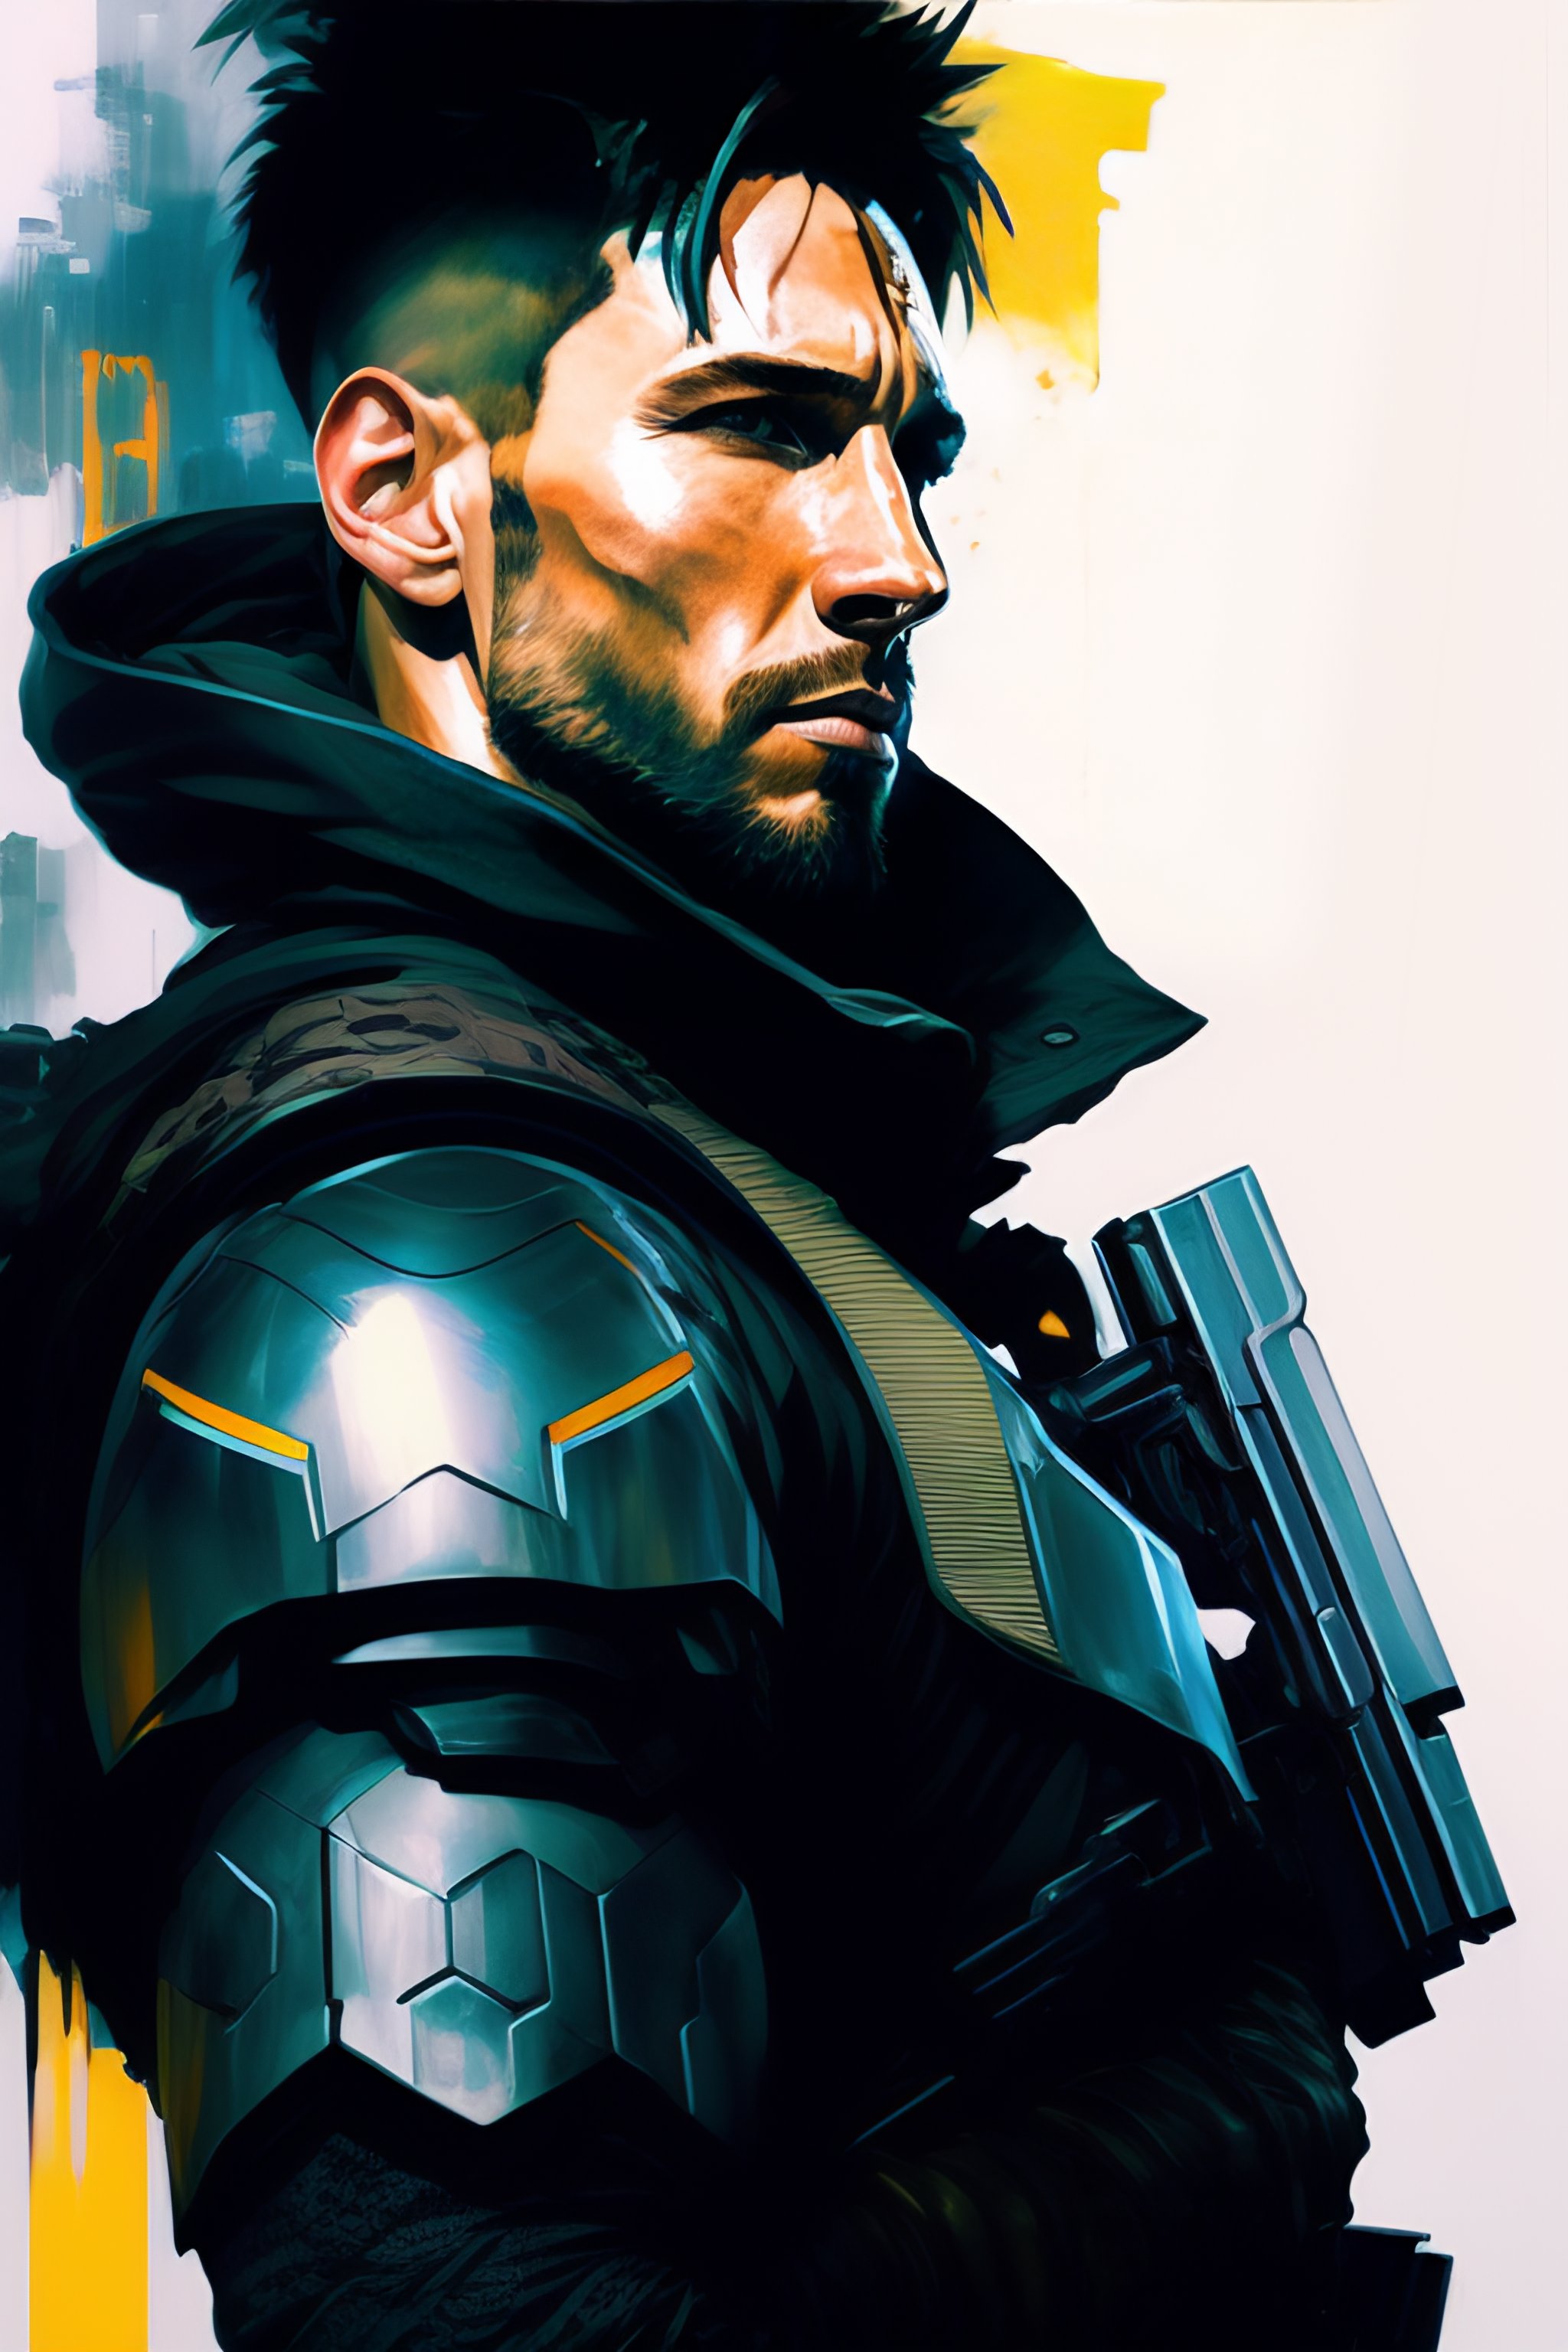 Lexica - Lionel messi wearing metal gear armor holding gun dramatic ...